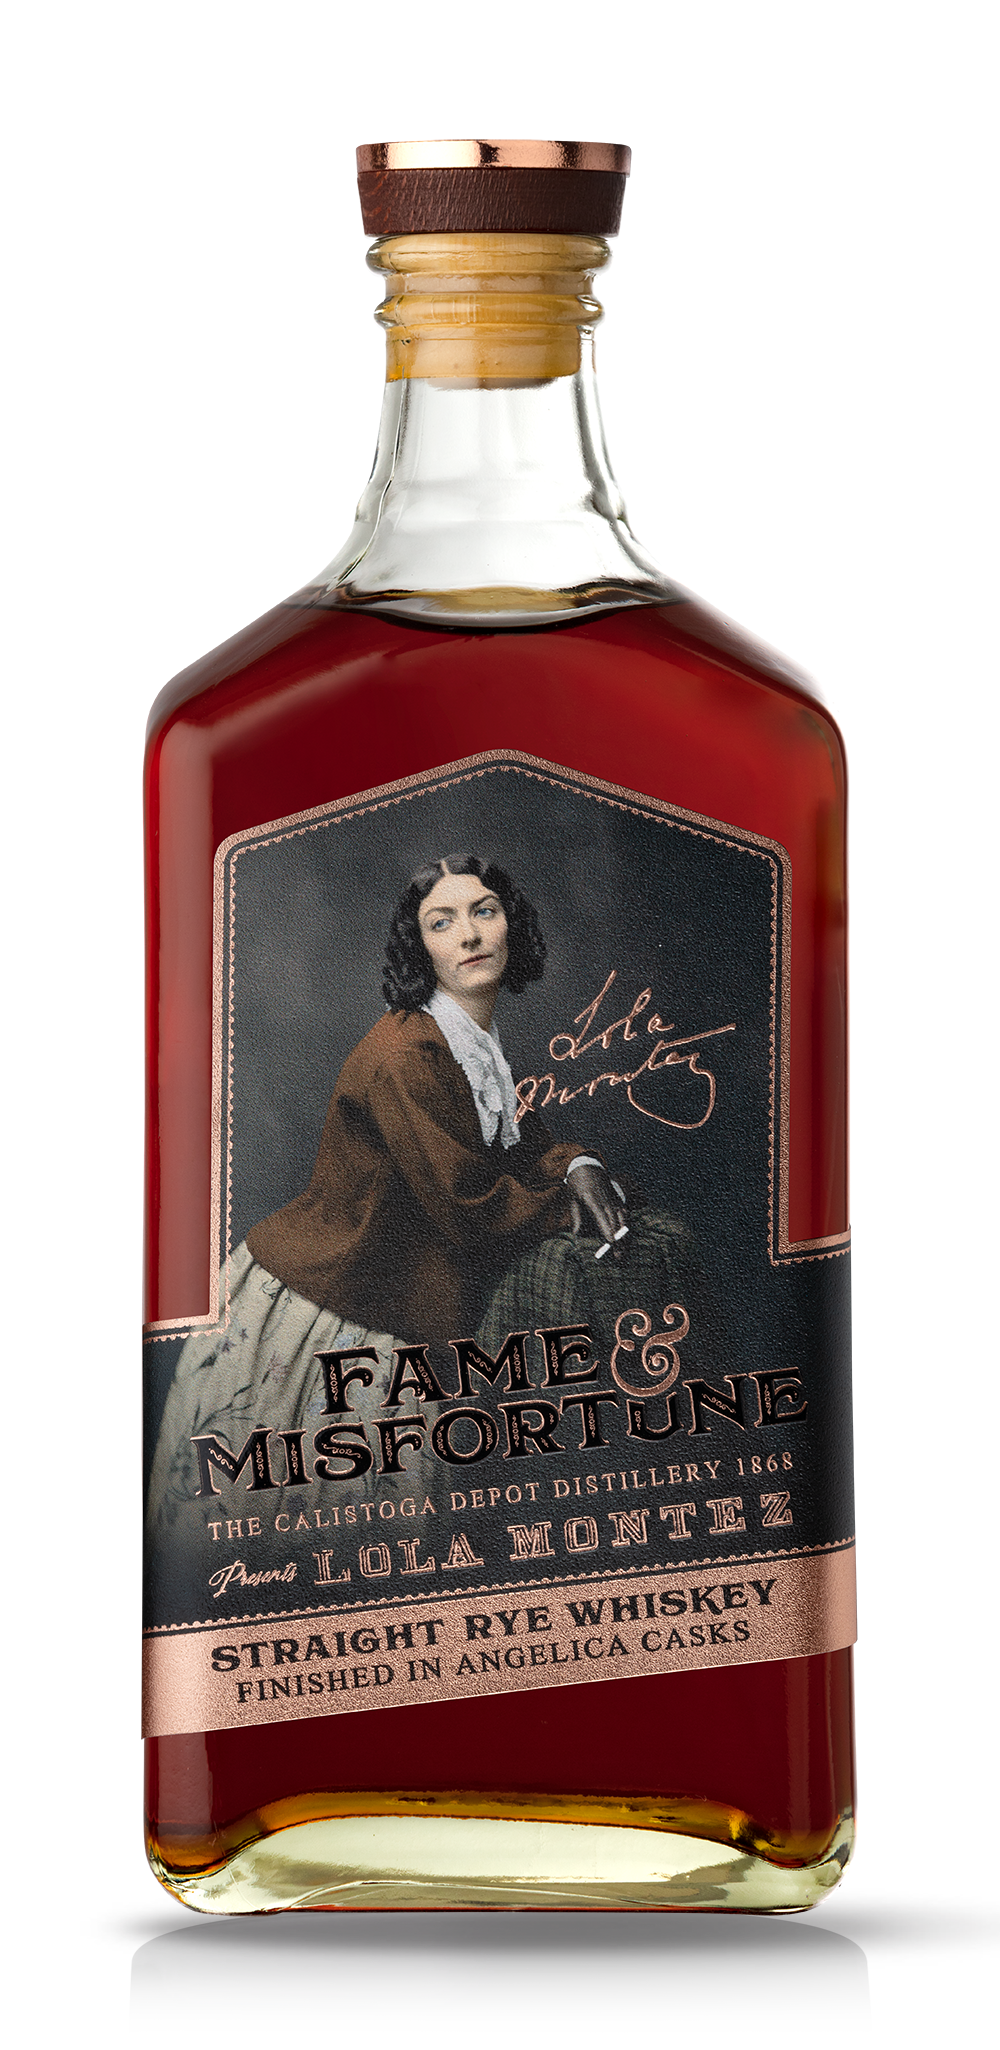 Fame & Misfortune Straight Rye Whiskey Finished in Angelica Casks by the Calistoga Depot Spirits